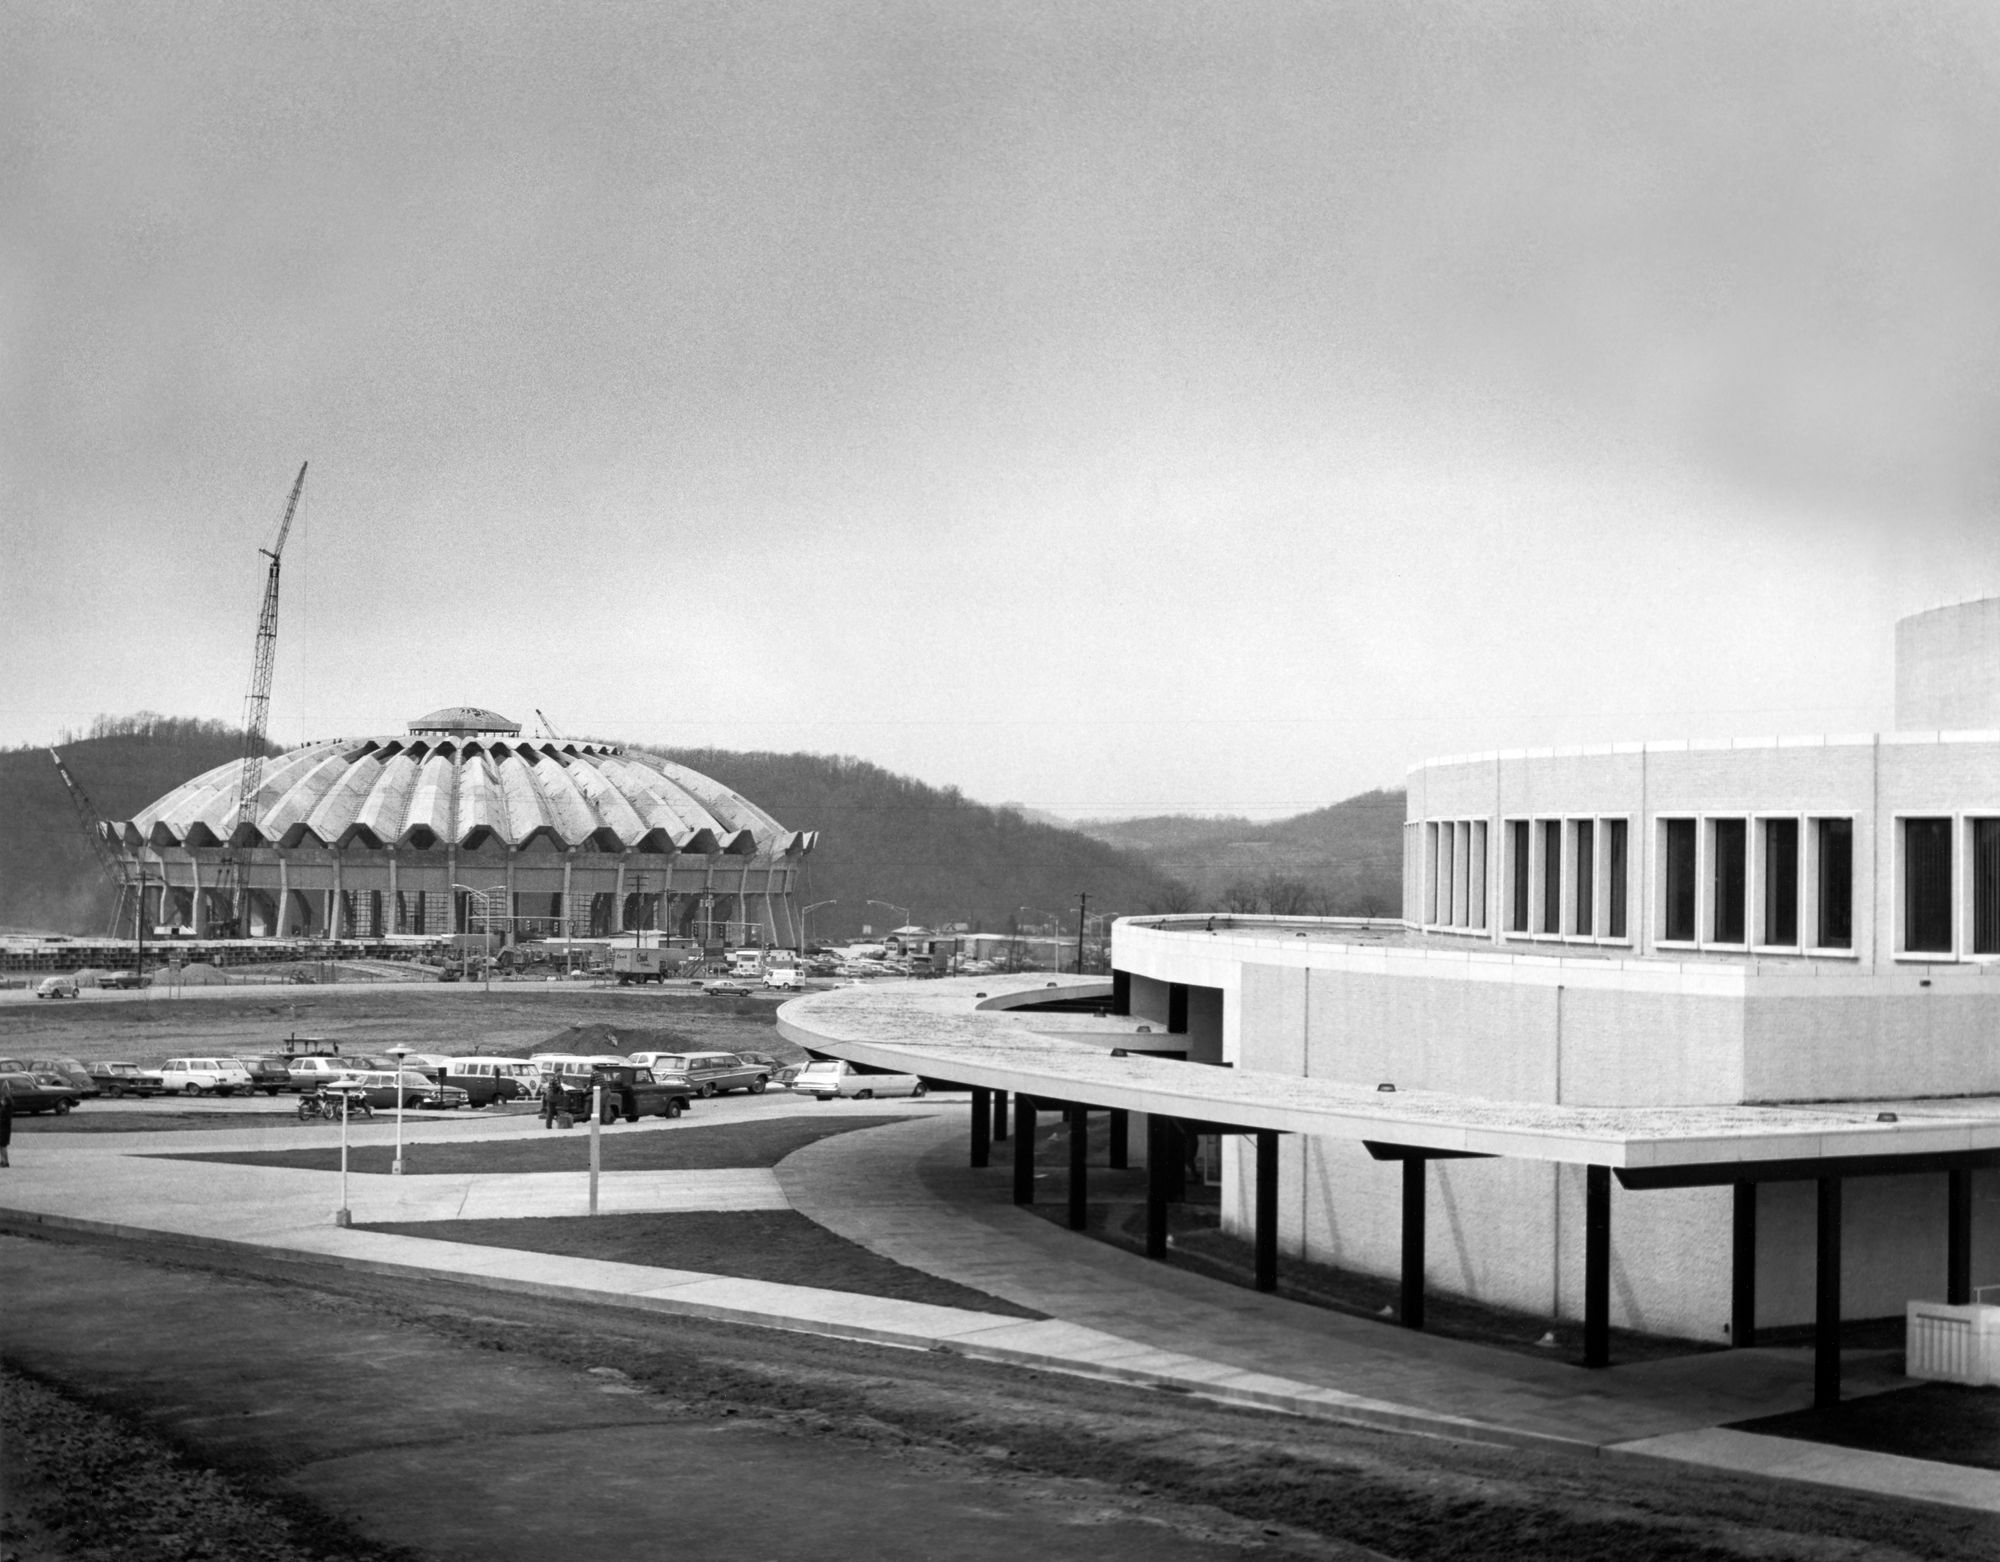 The Coliseum under construction with the Creative Arts Center in the foreground.